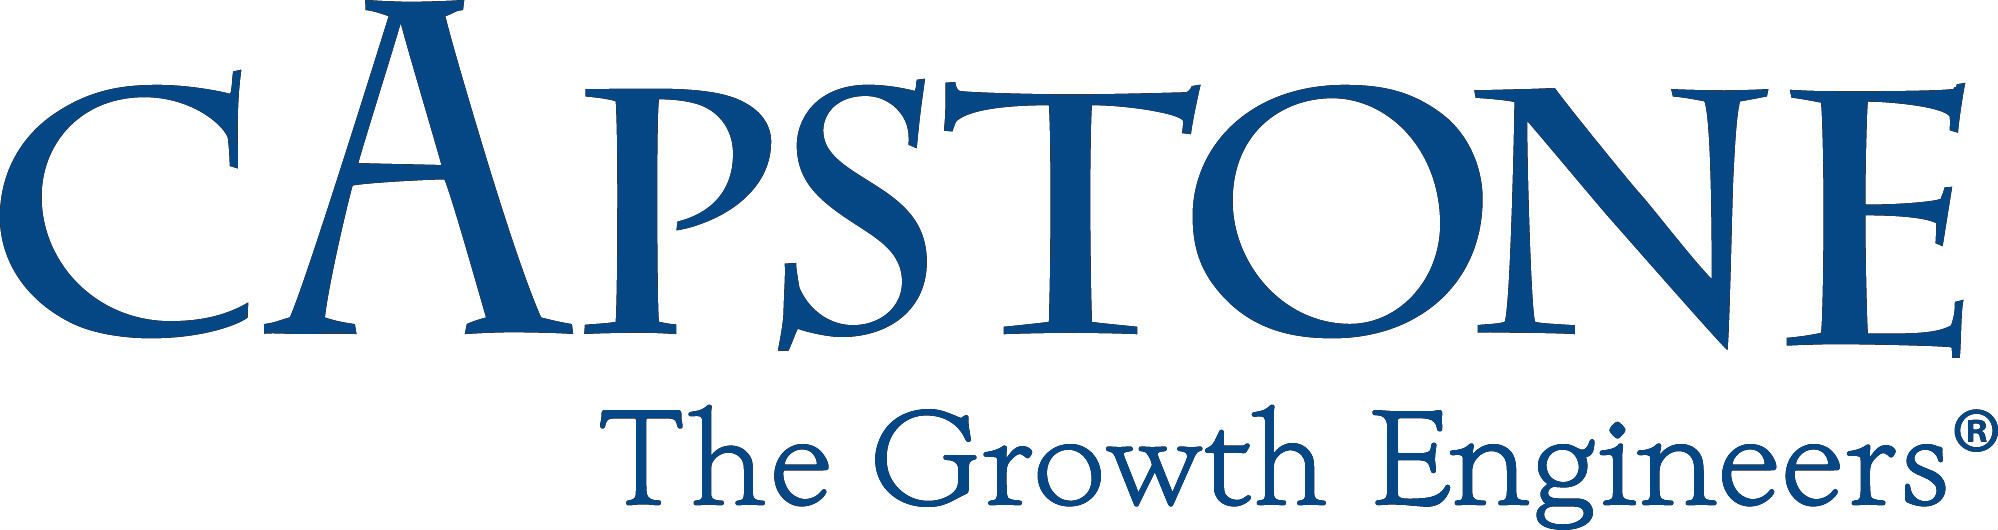 Capstone Strategic is a management consulting firm located outside of Washington DC specializing in corporate growth strategies, primarily mergers and acquisitions for the middle market.